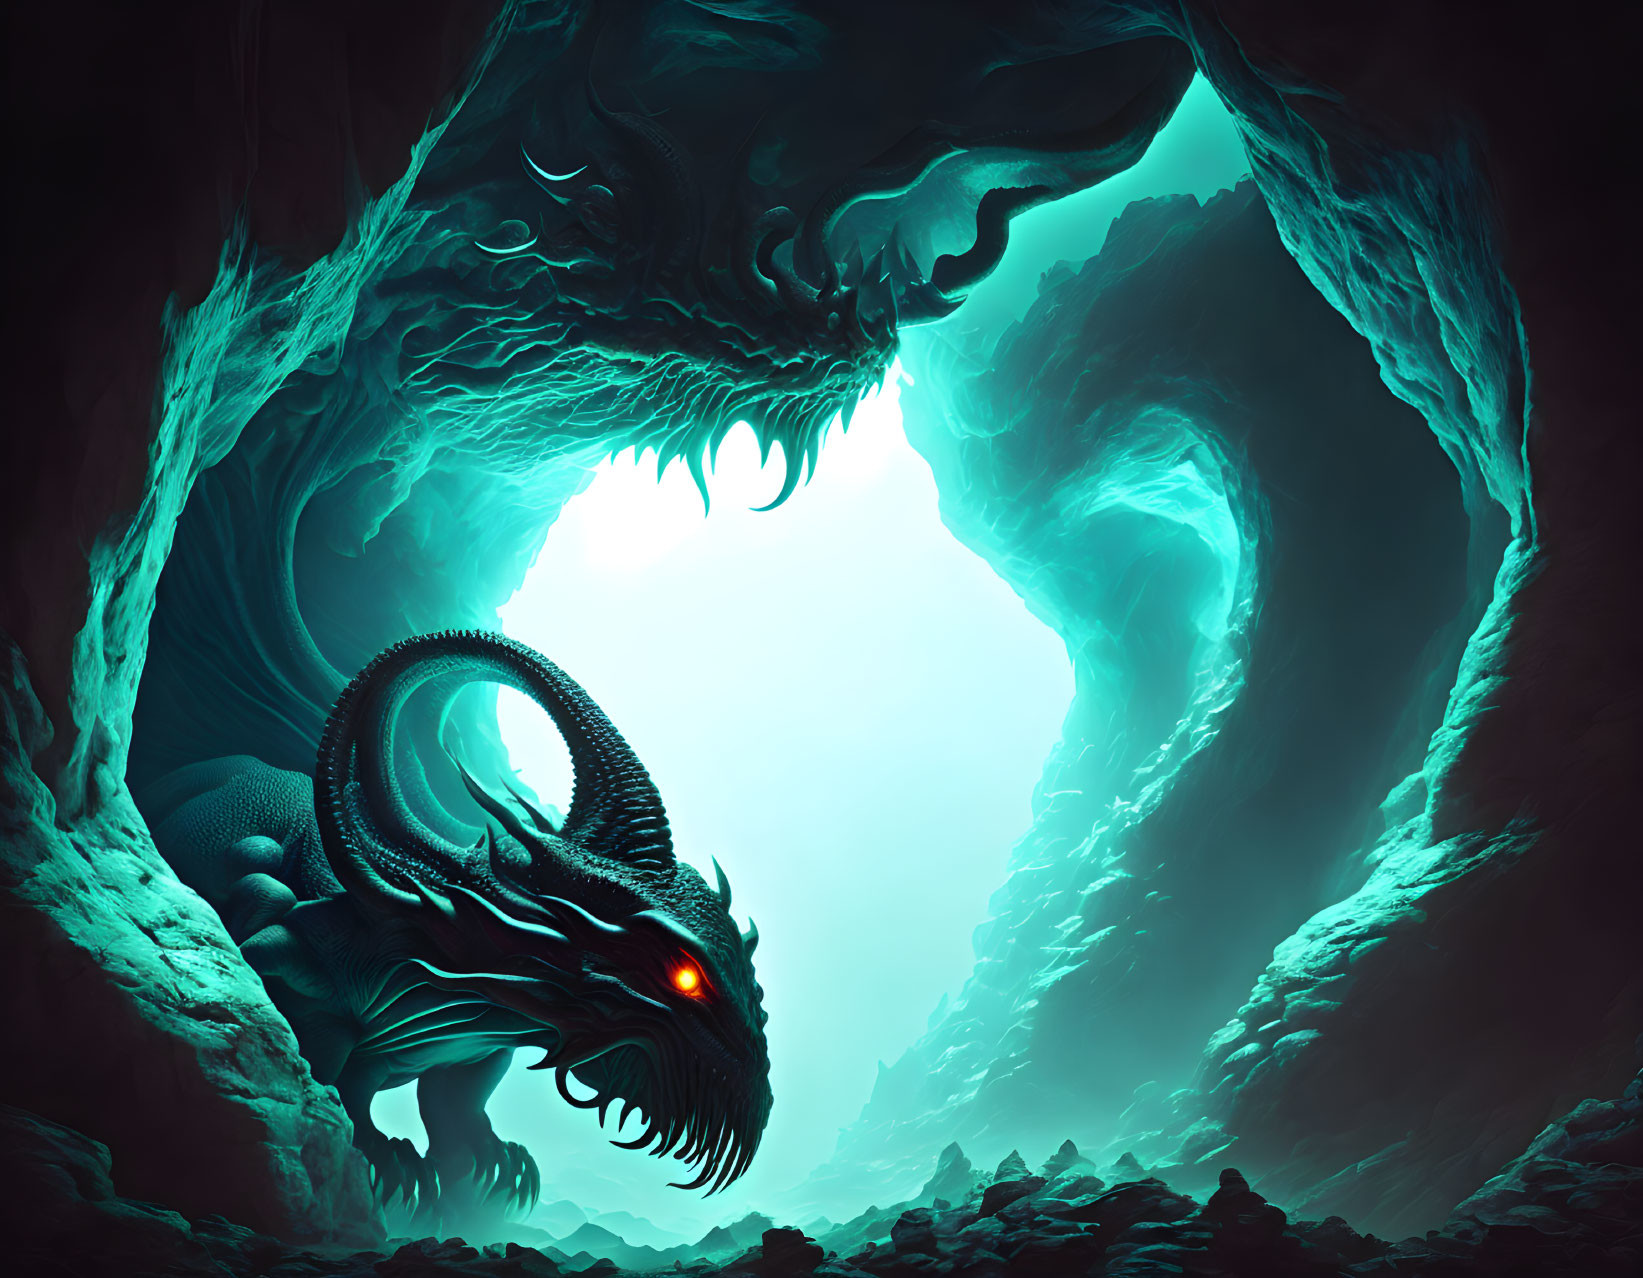 Menacing dragon in cavern with glowing eyes and mouth, eerie blue light, rocky terrain